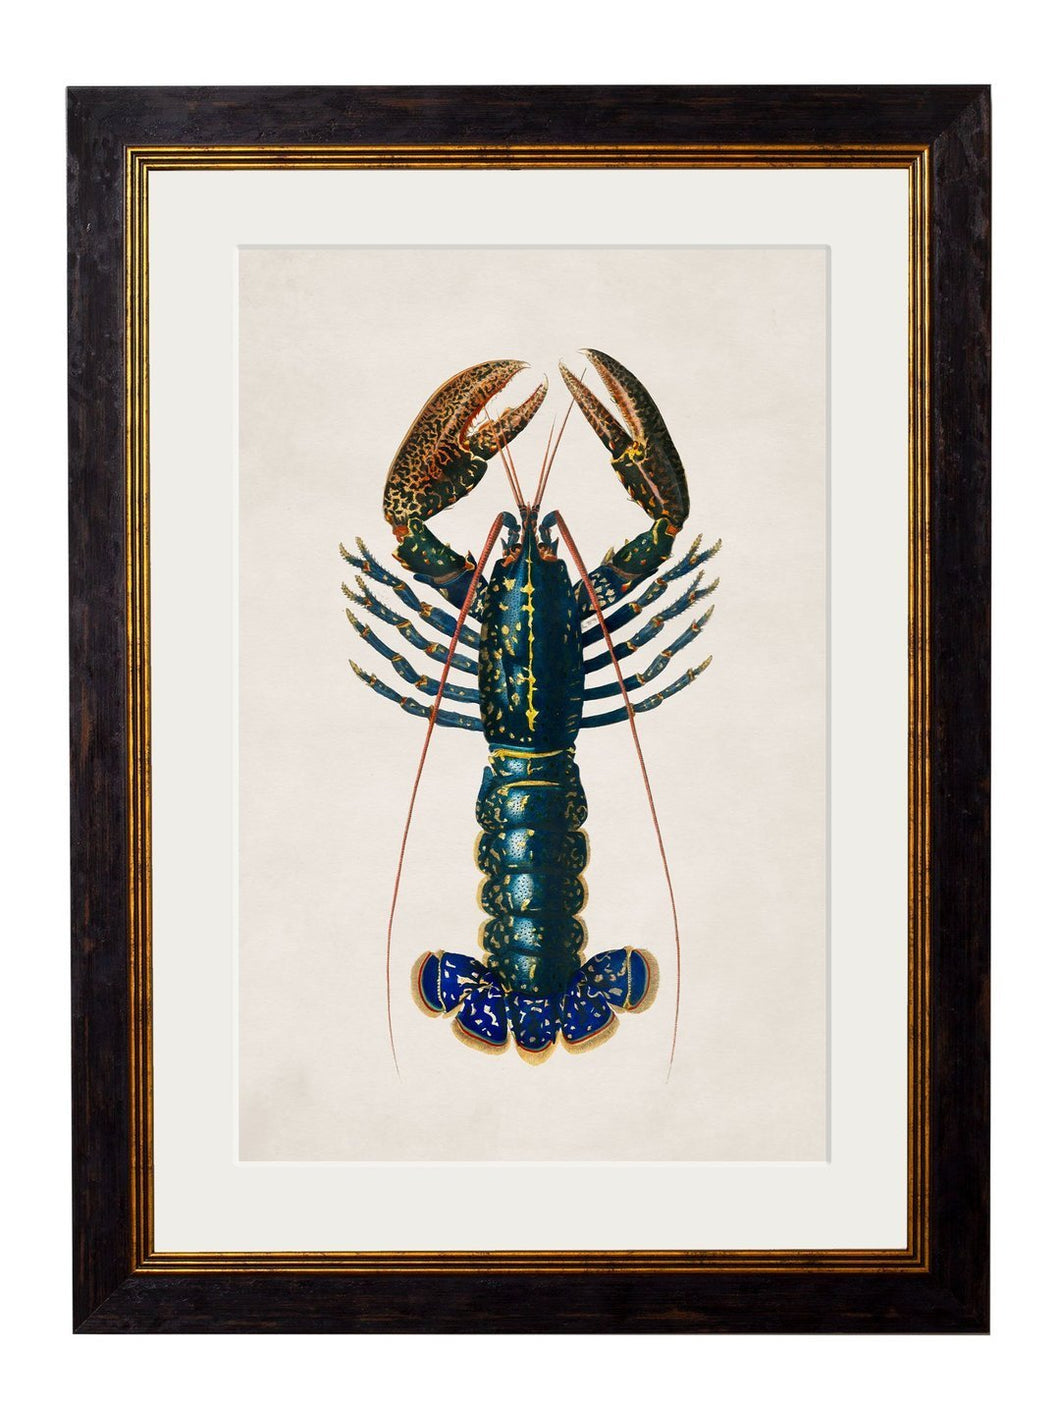 Framed Crimson Crawfish Print - Referenced from a French 1800s Hand-Coloured PrintVintage FrogPictures & Prints